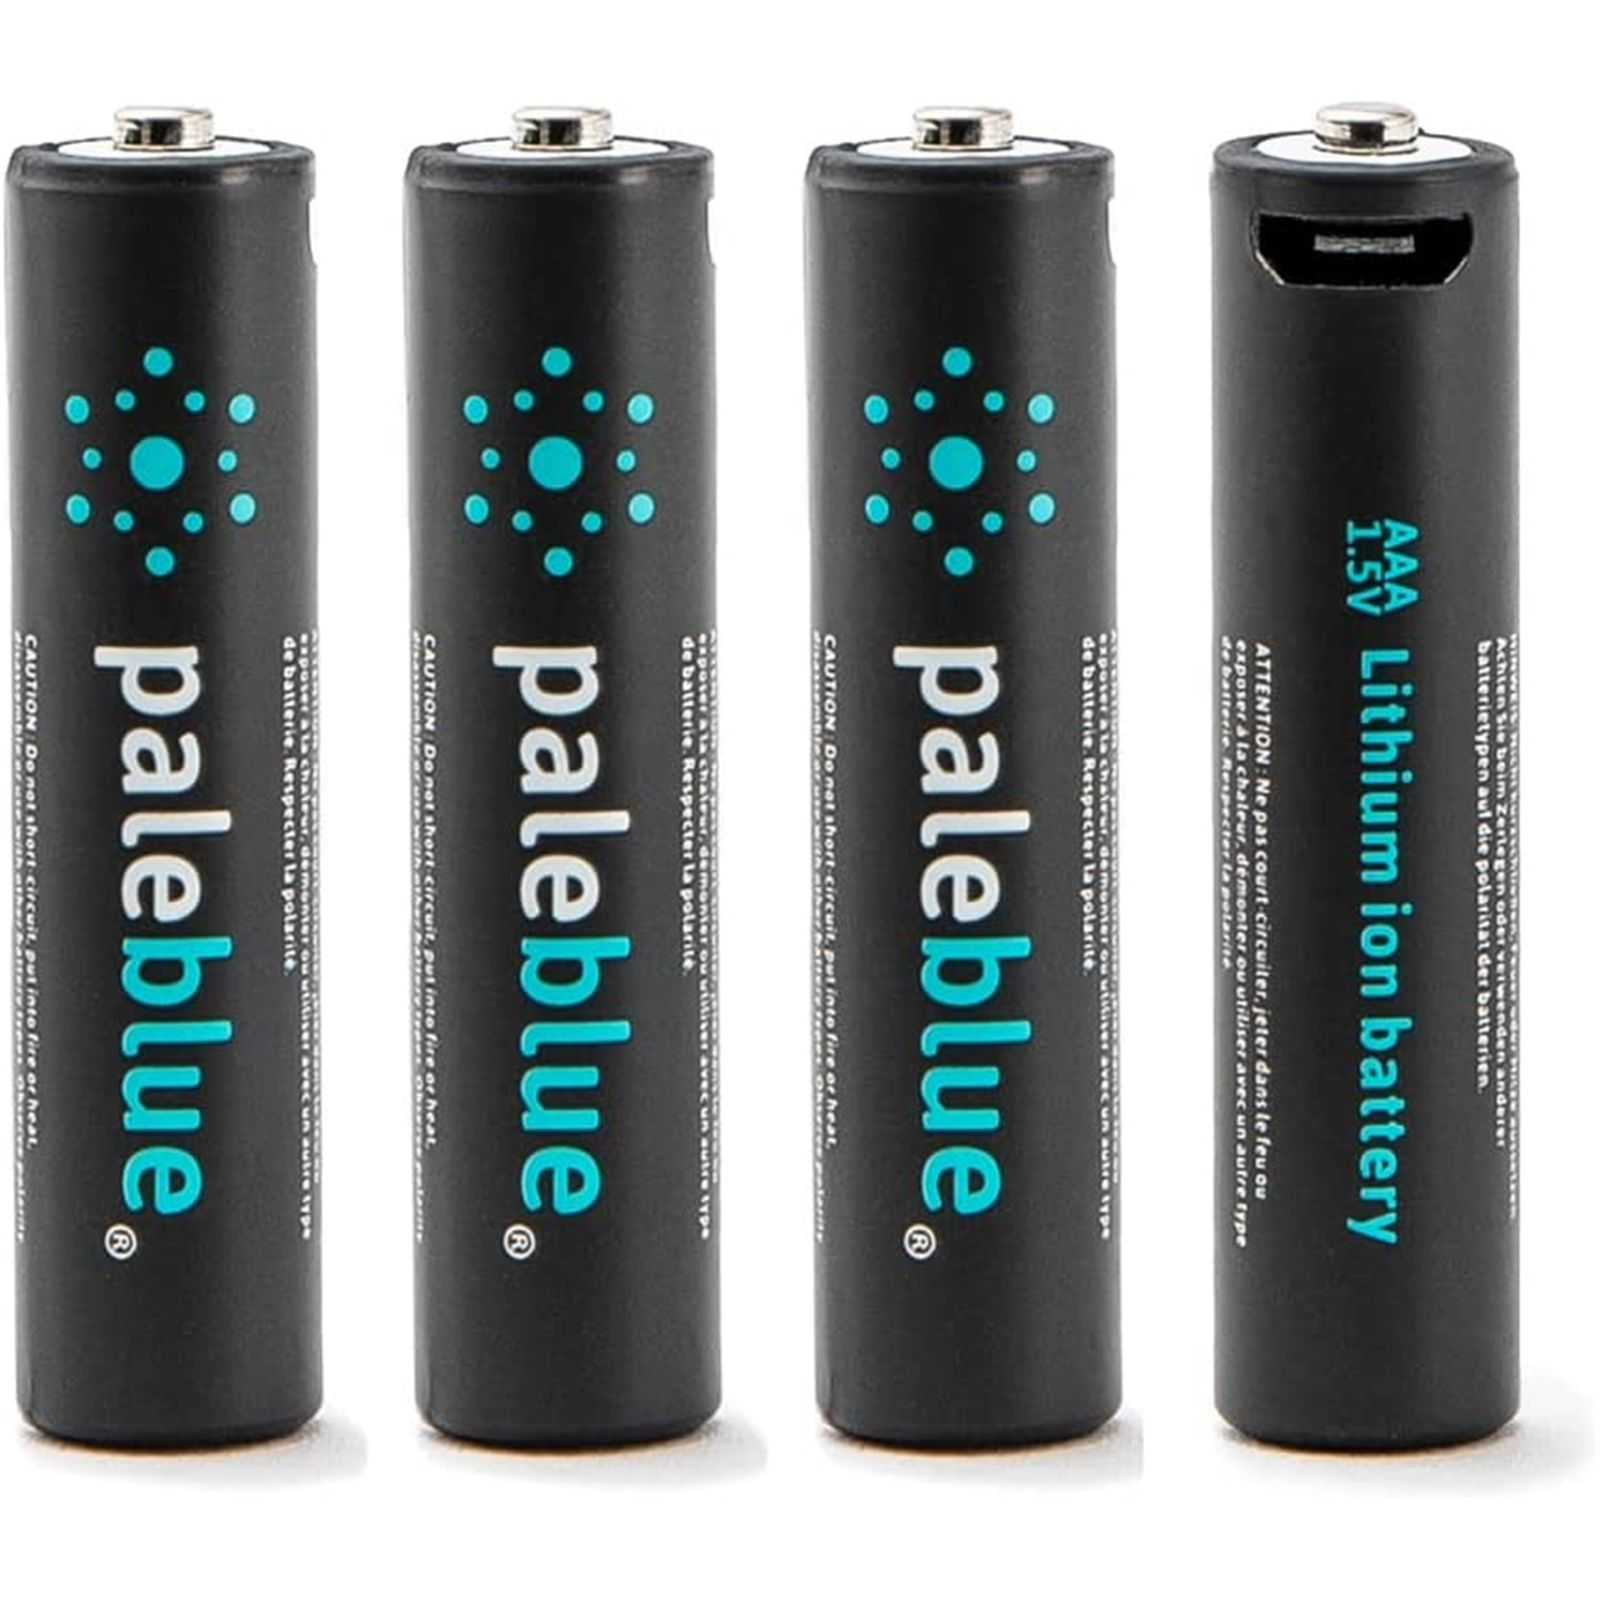 Buy the Pale Blue USB Rechargeable AAA Batteries 4 Pack - 4x Lithium Ion AAA...  ( PB-AAA ) online - PBTech.com/au